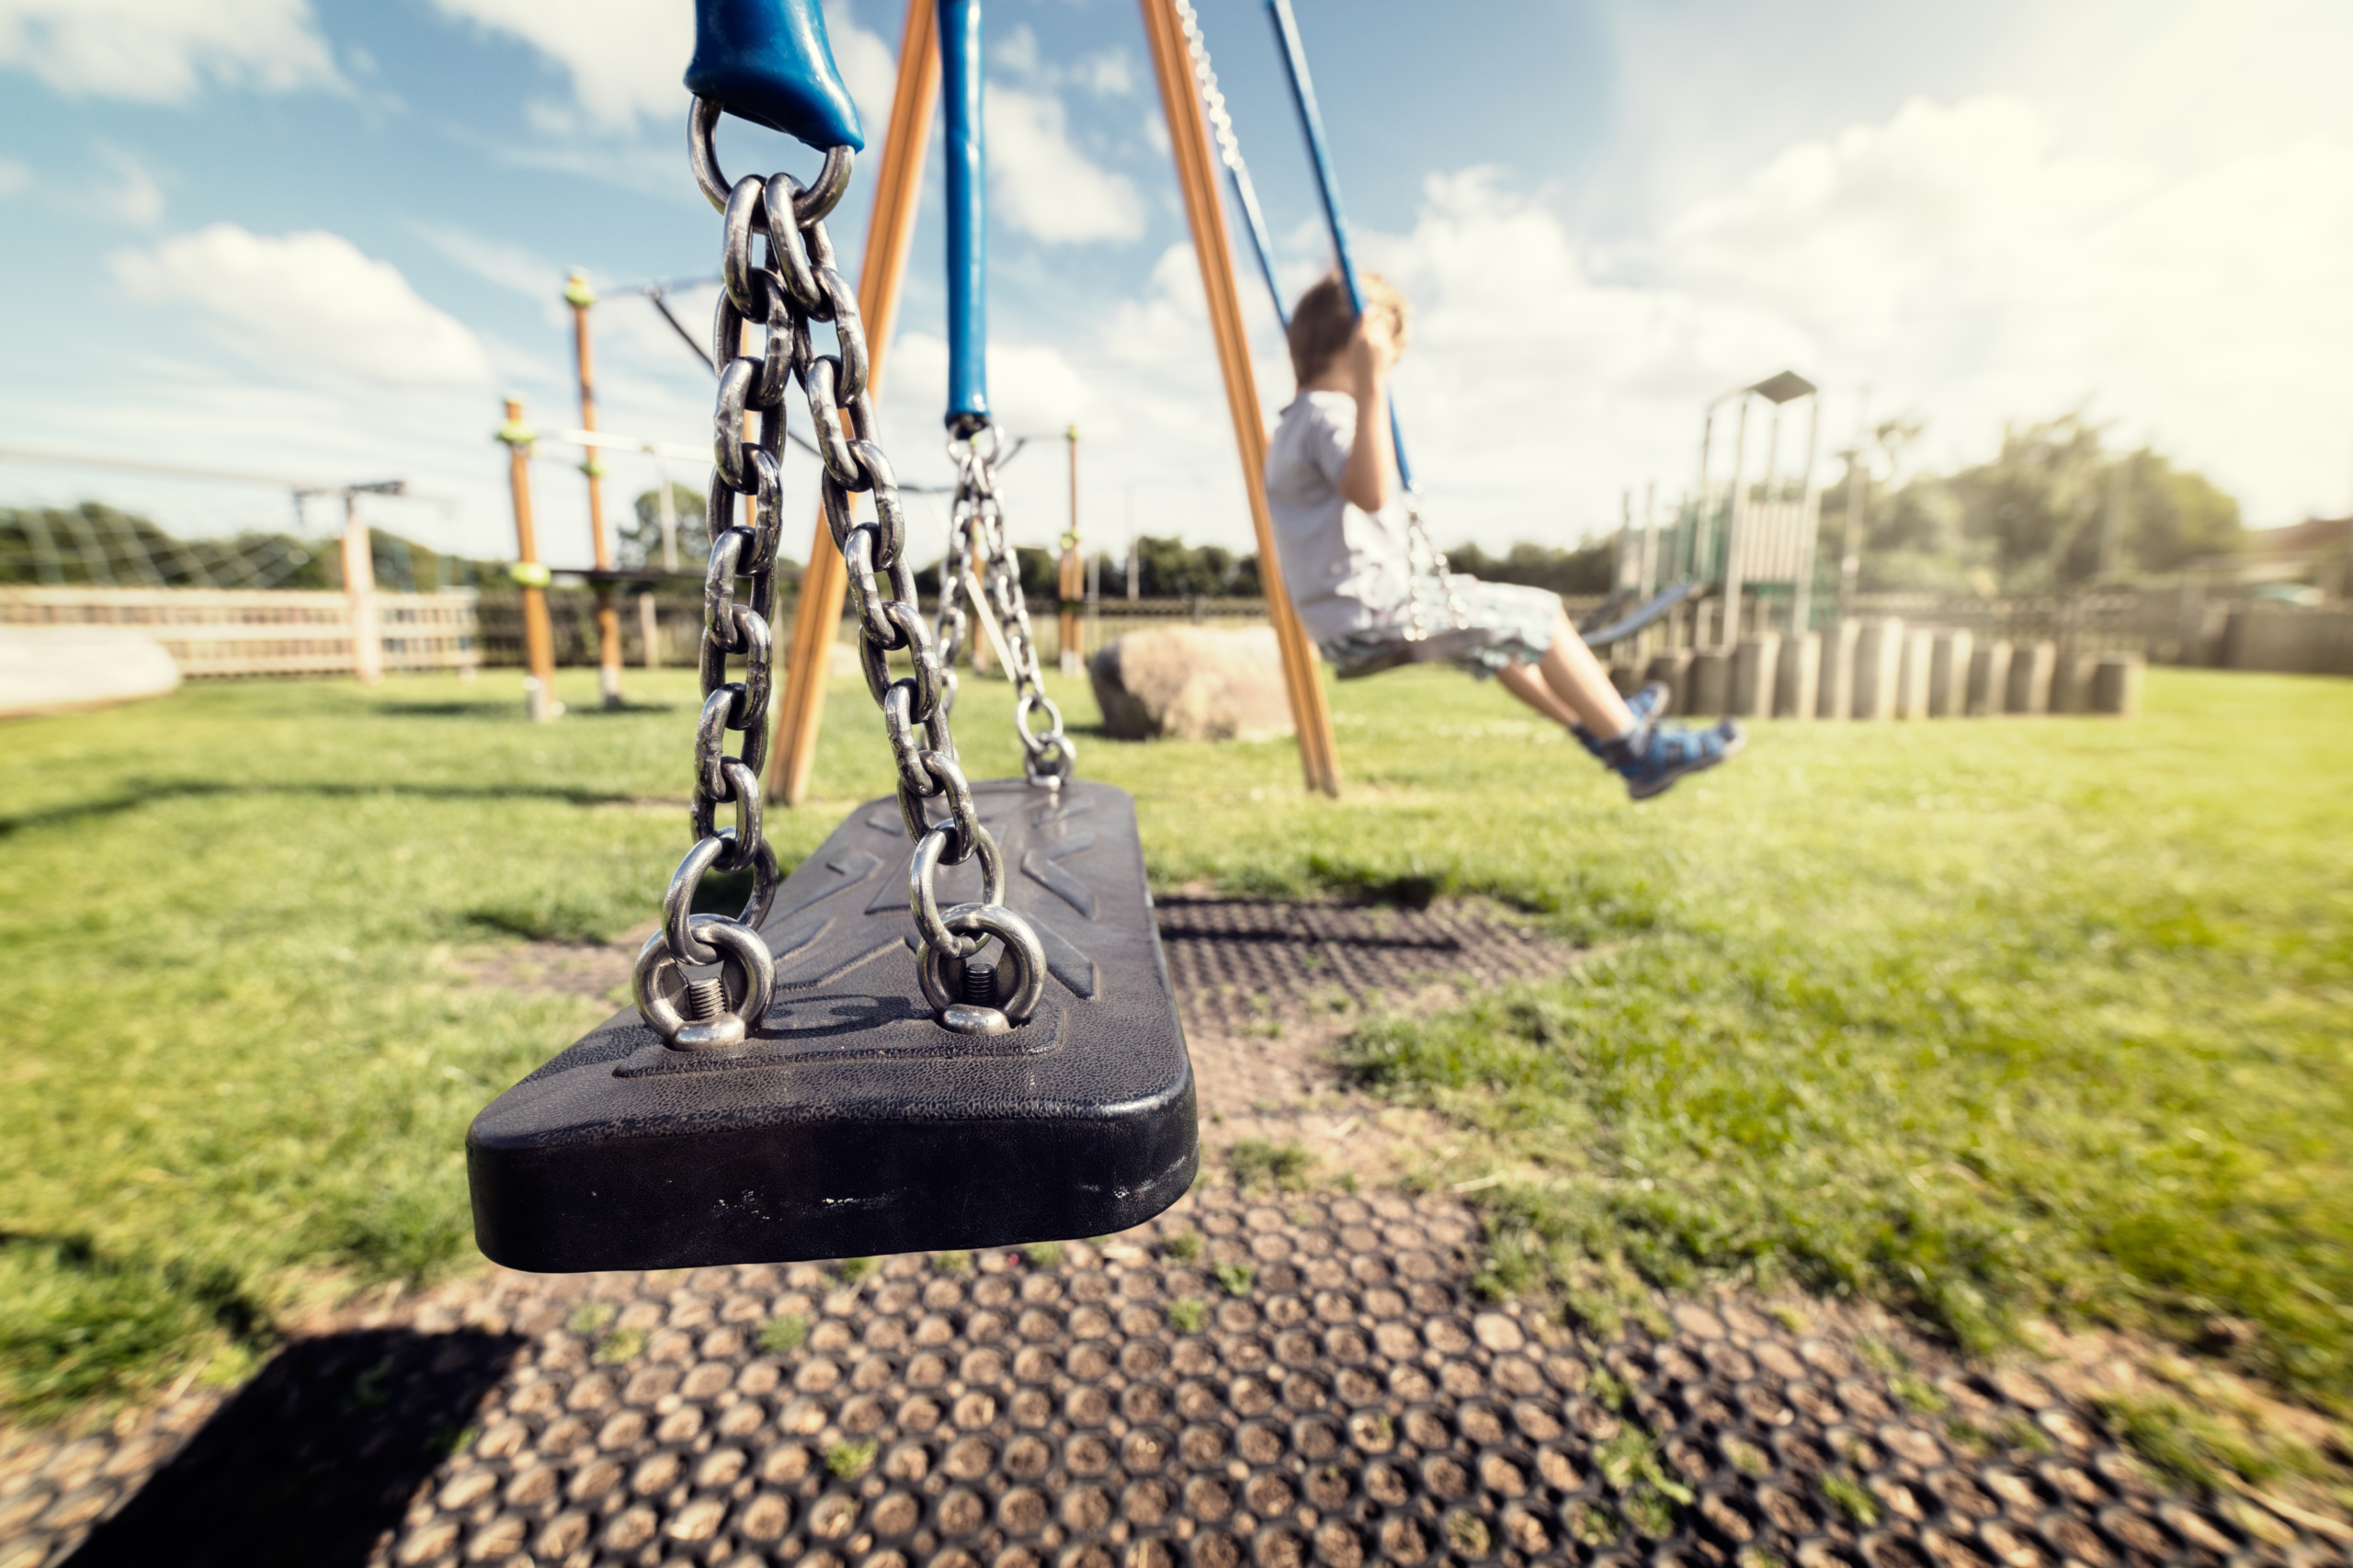 Empty playground swing with children playing in the background concept for child protection, abduction or loneliness